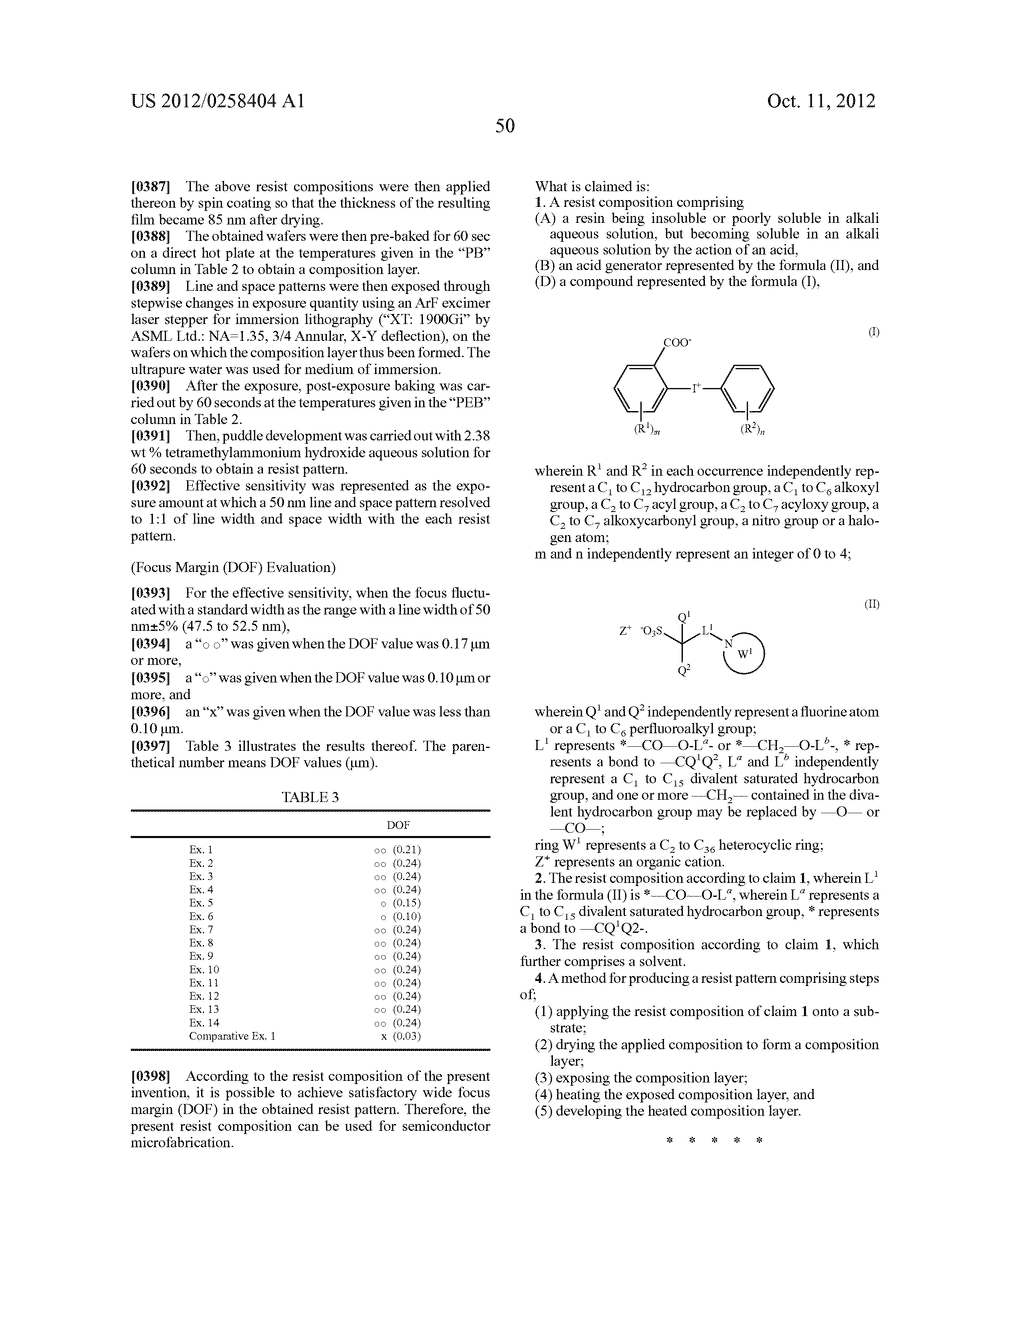 RESIST COMPOSITION AND METHOD FOR PRODUCING RESIST PATTERN - diagram, schematic, and image 51